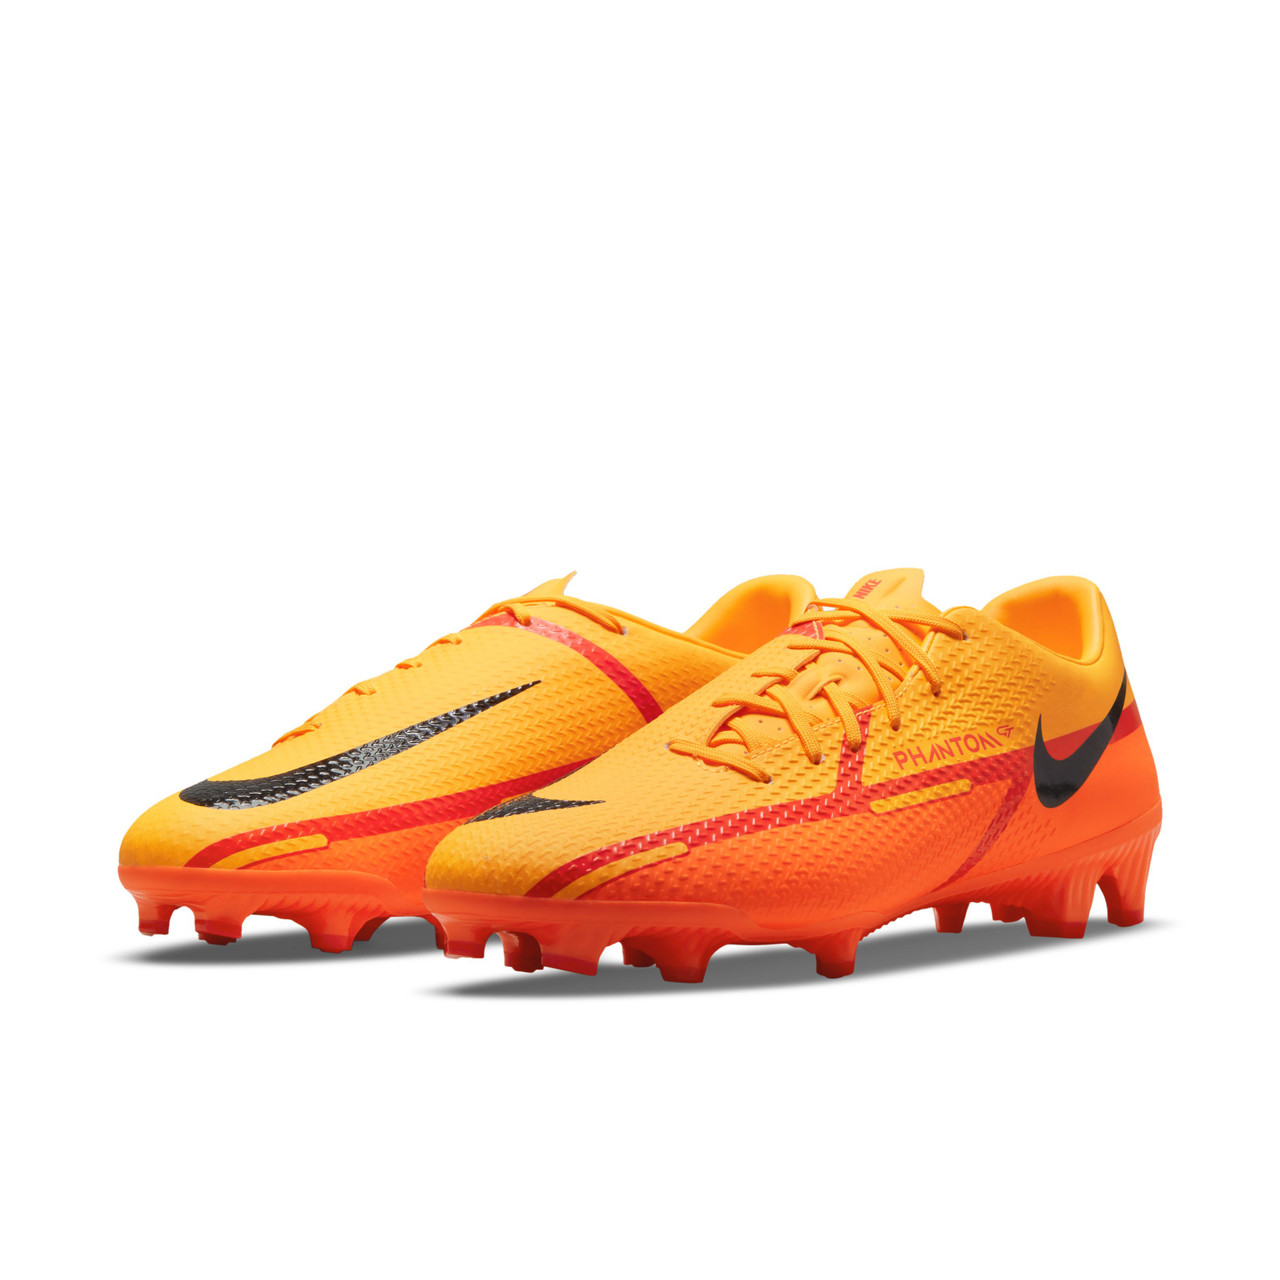 Nike soccer cleats product